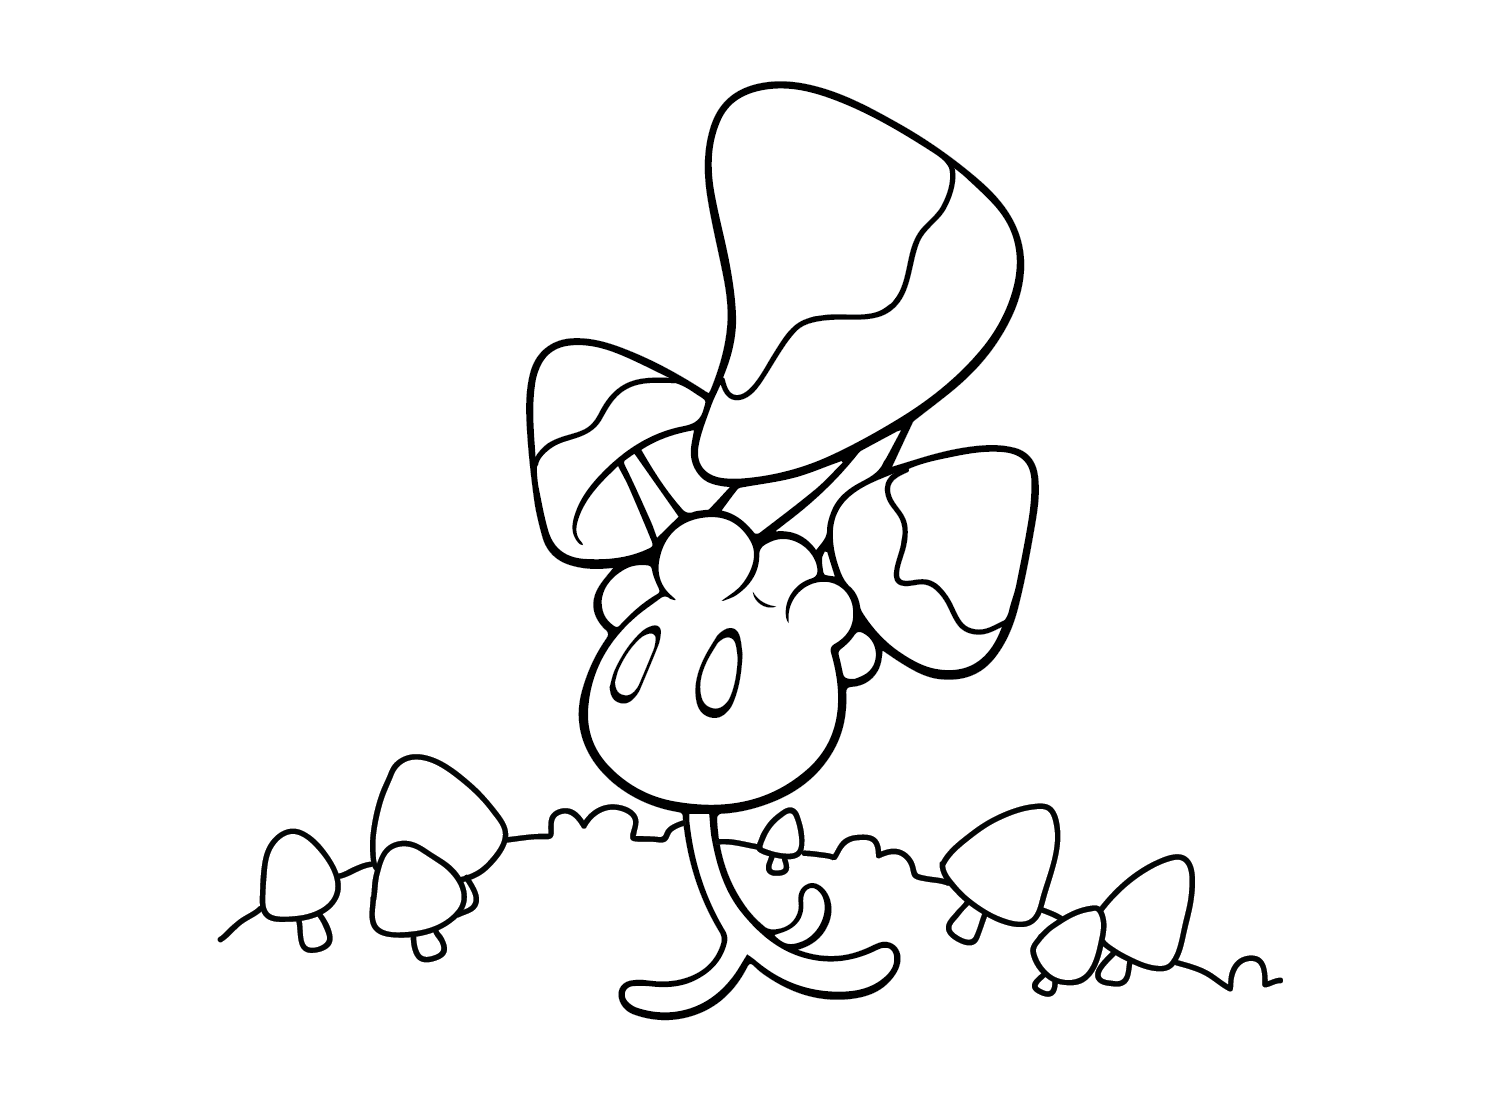 Adorable Morelull Coloring Page